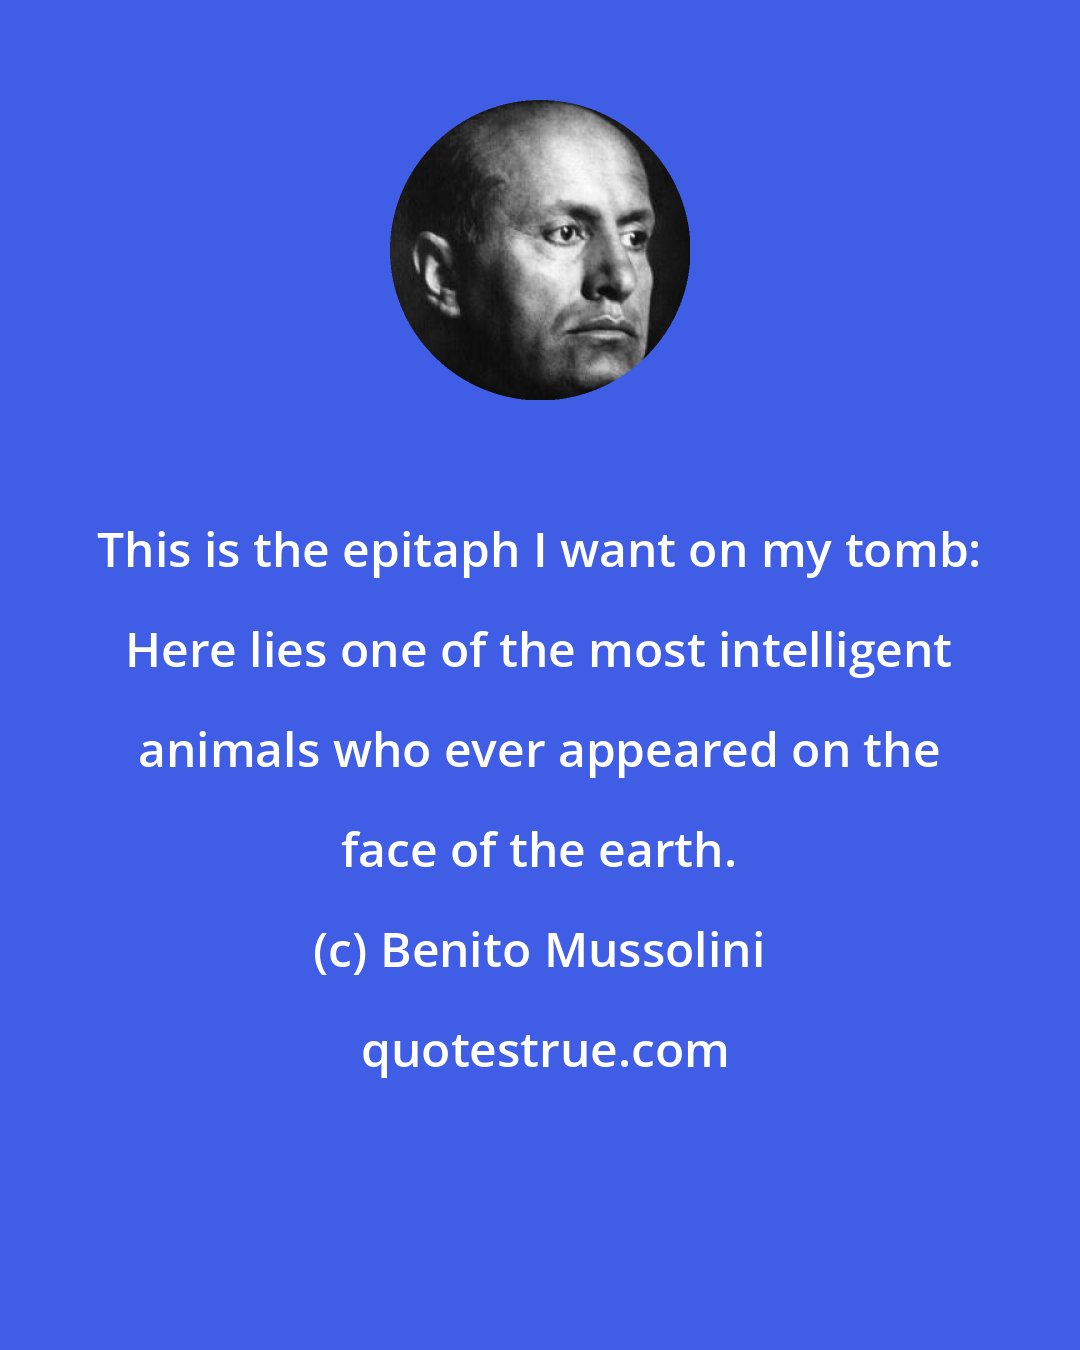 Benito Mussolini: This is the epitaph I want on my tomb: Here lies one of the most intelligent animals who ever appeared on the face of the earth.